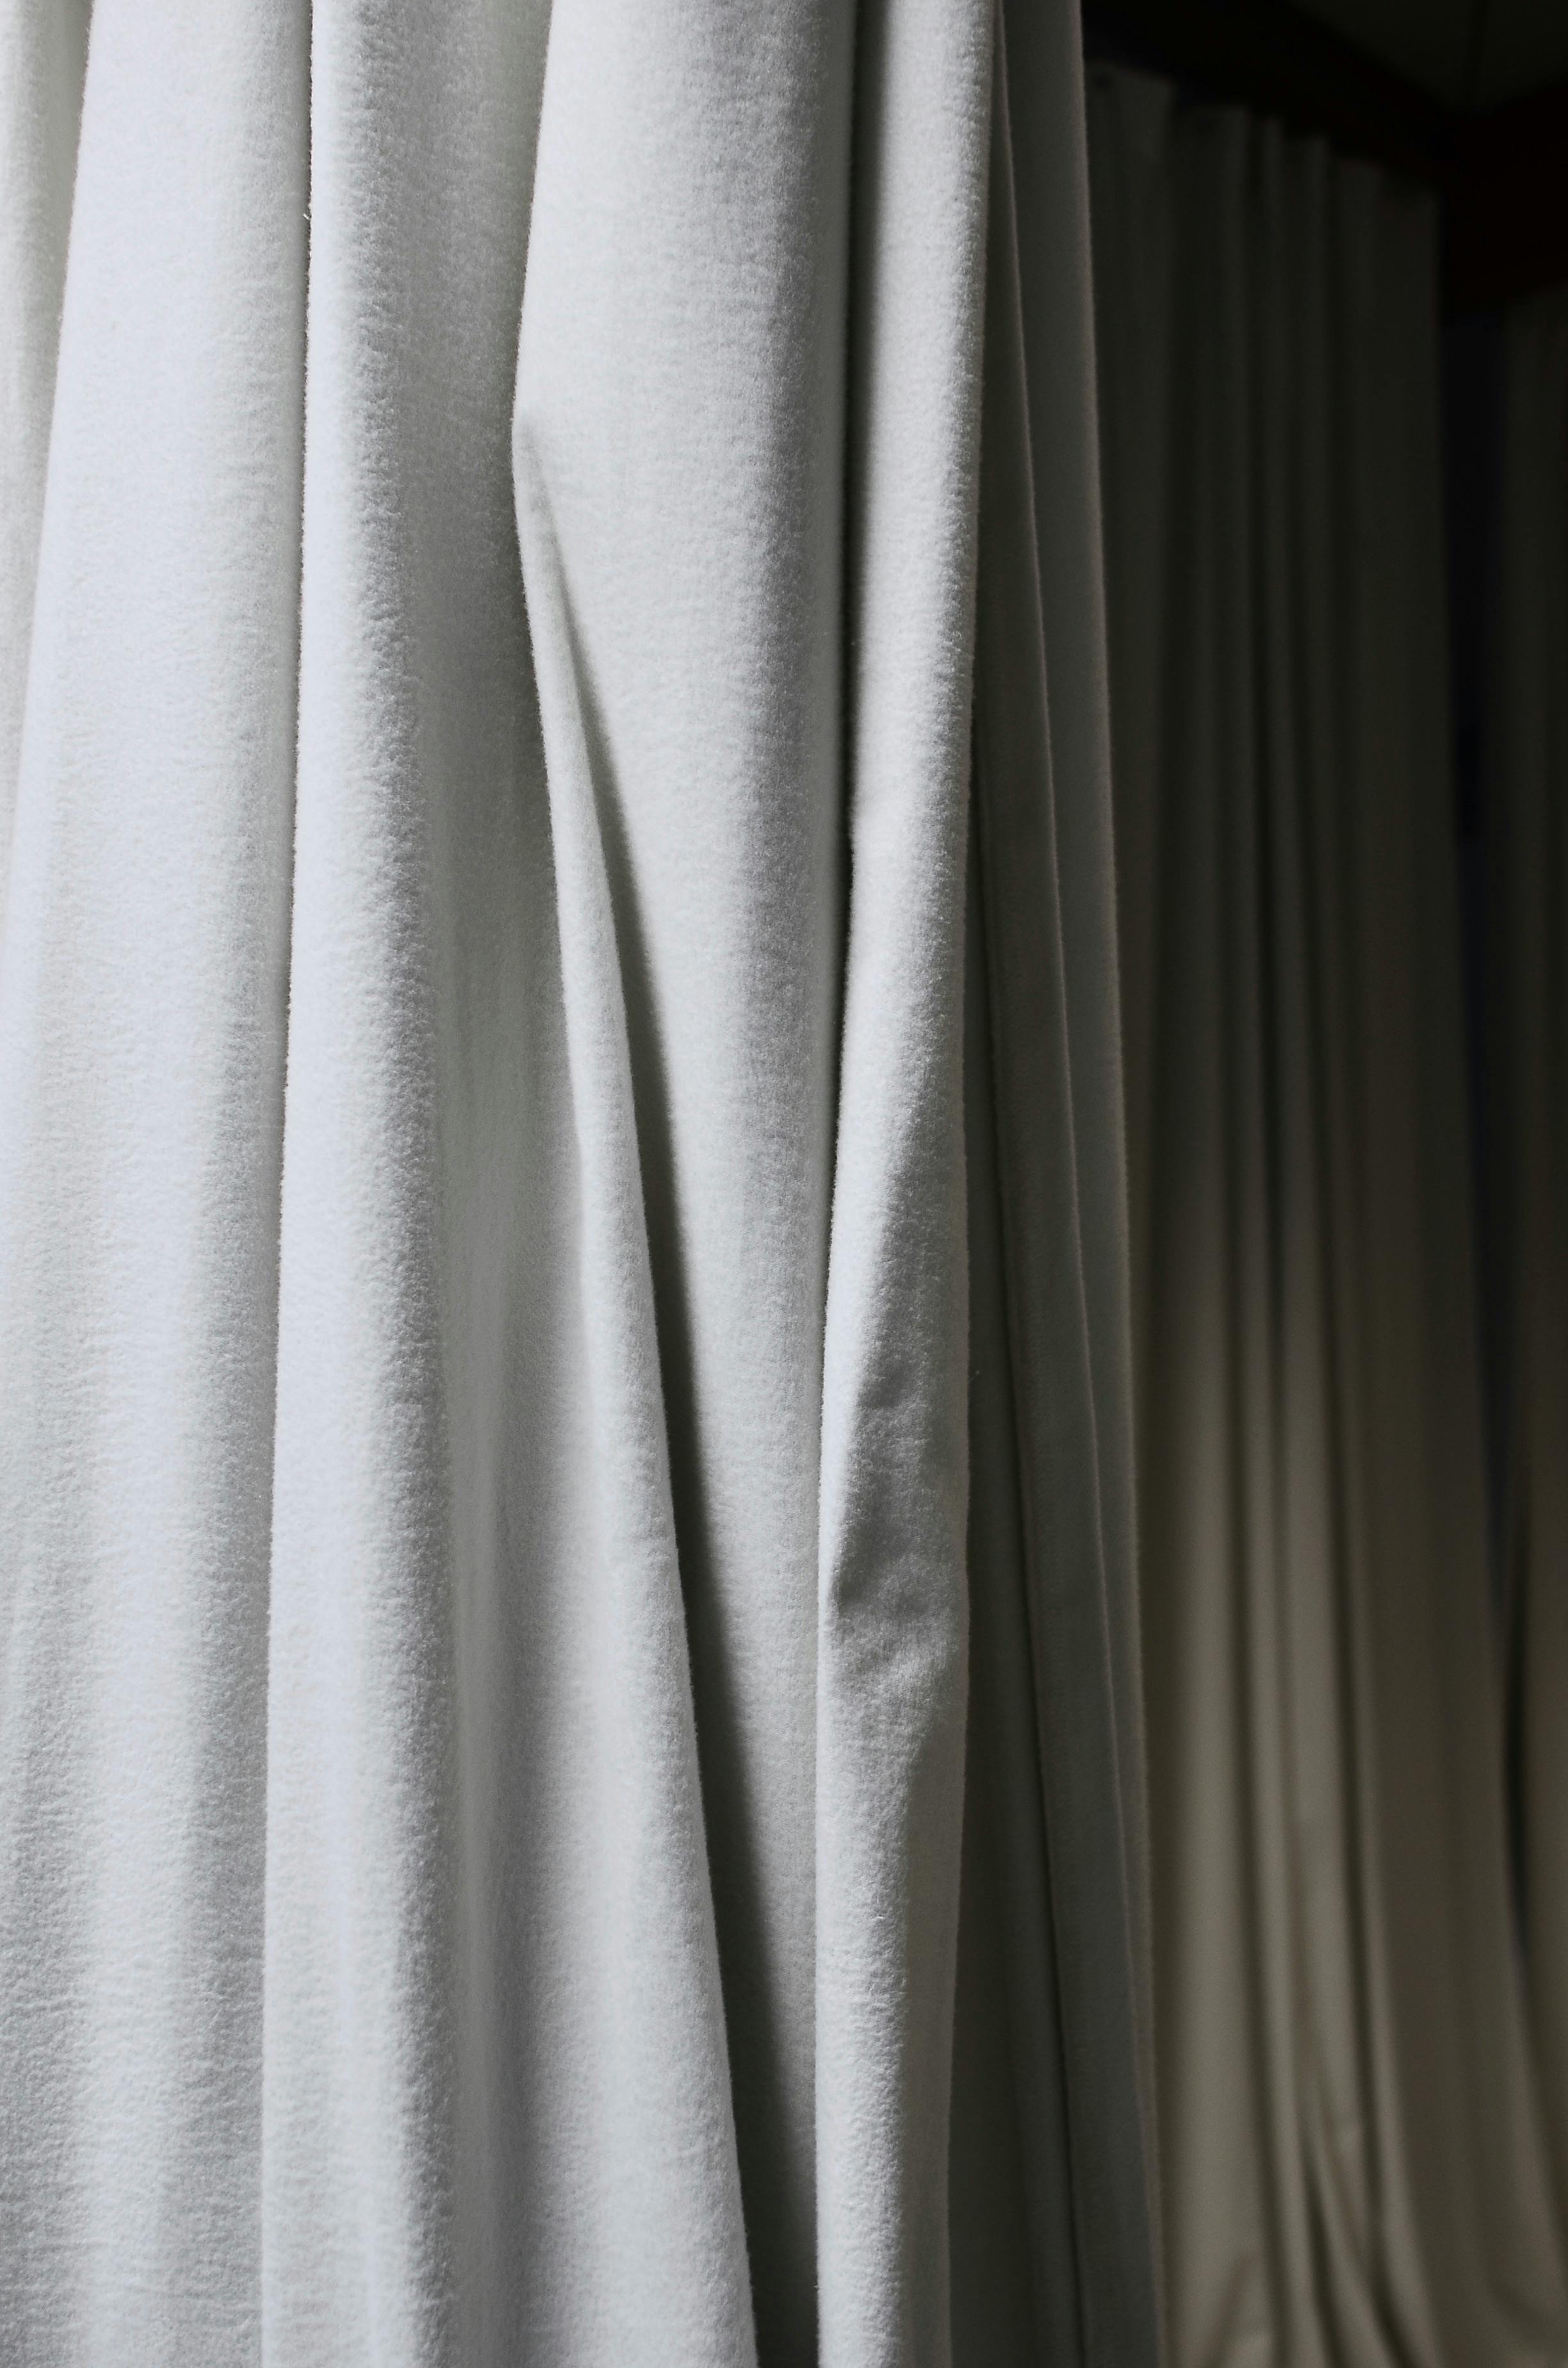 curtains with soft crumpled textile with creases